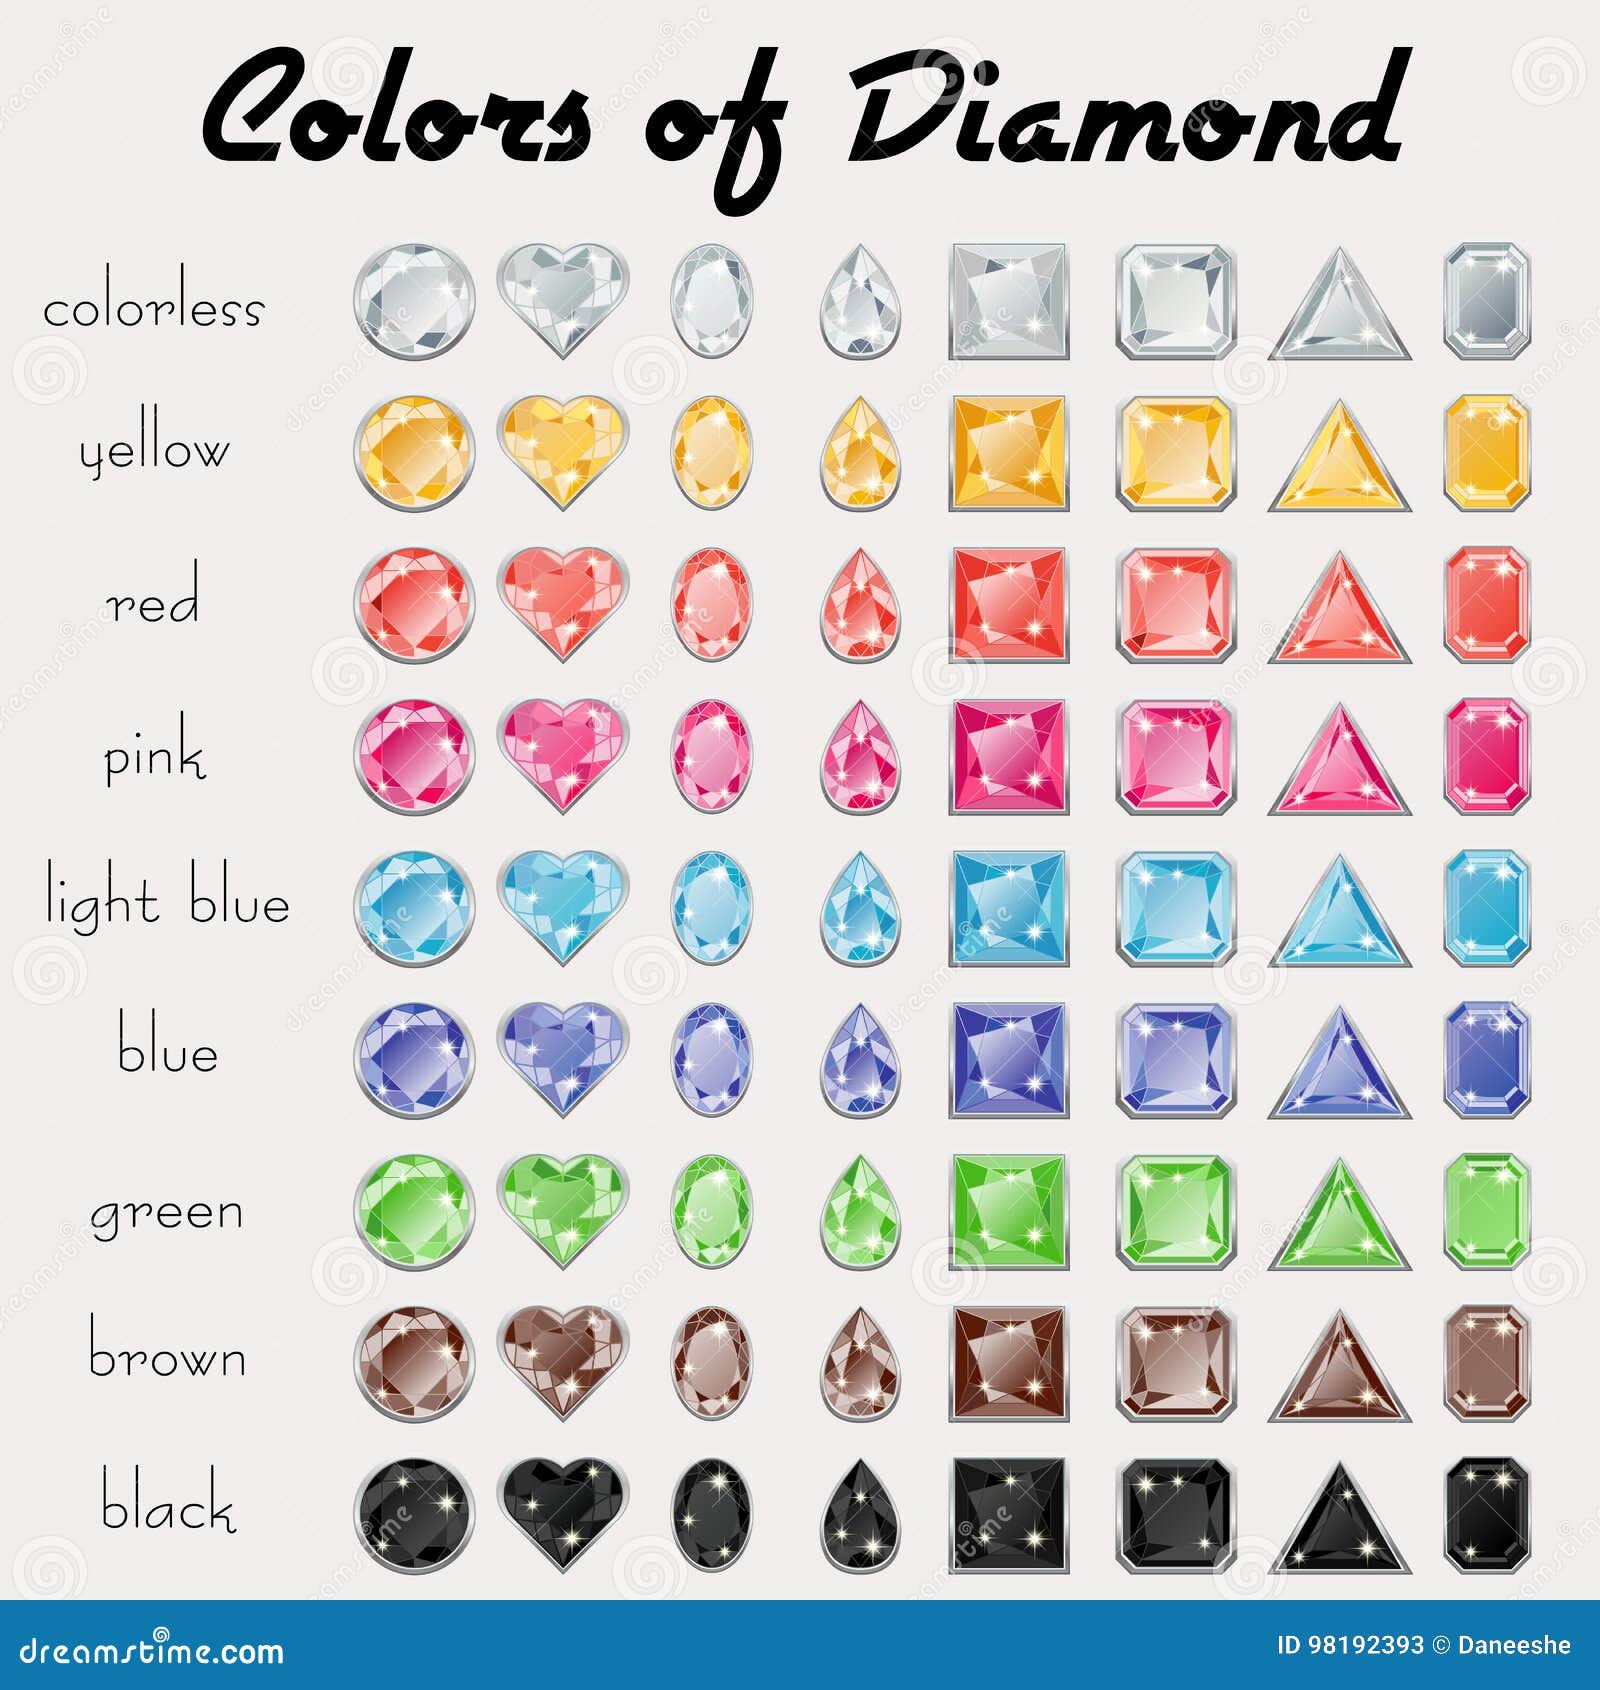 Colors of Diamond stock vector. Illustration of icon - 98192393